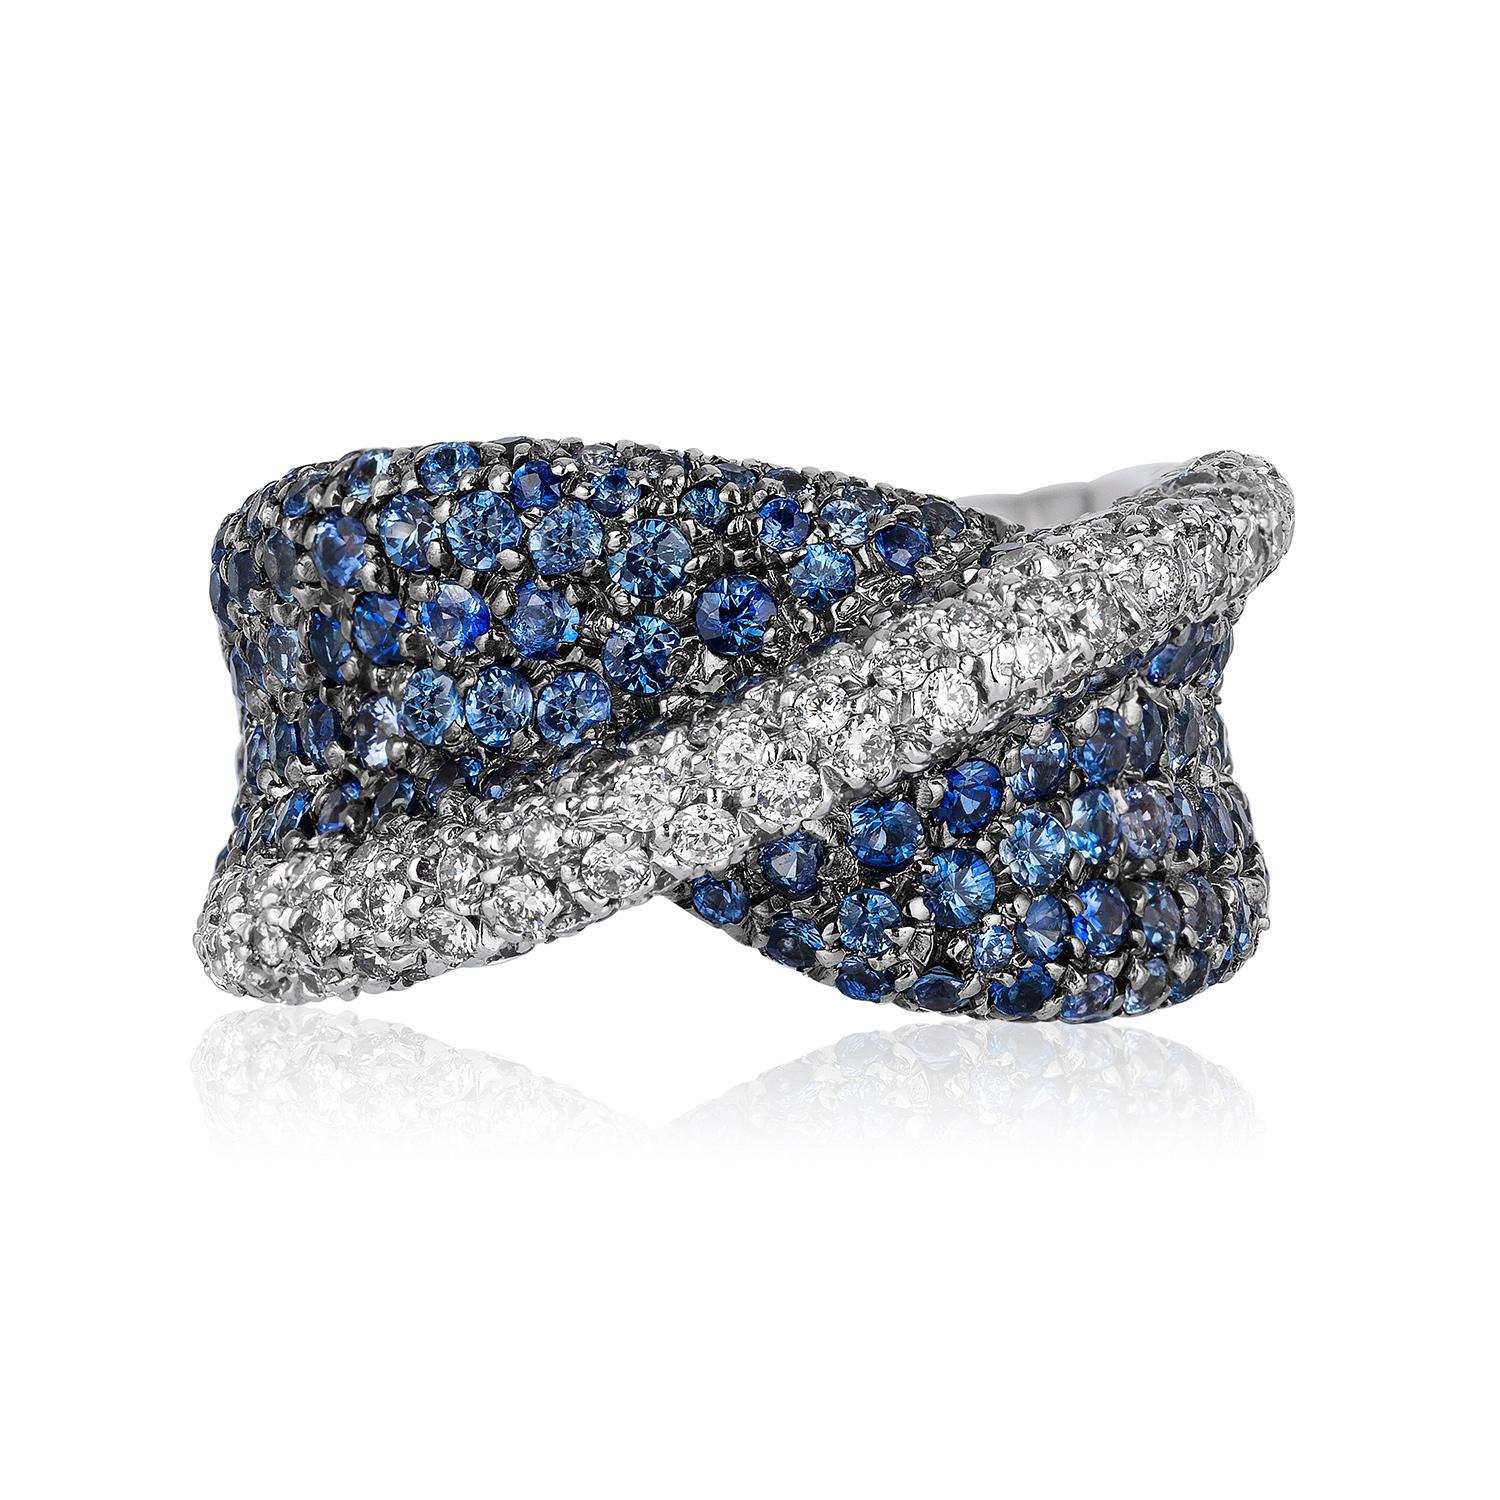 Andreoli Blue Sapphire Diamond Ring 18KT White Gold. This ring features, 3.10 carats of round blue sapphires accented with 1.17 carats of full ideal round cut brilliant diamonds. The diamonds are F/G/H in Ccolor VS-SI Clarity. The ring is set with